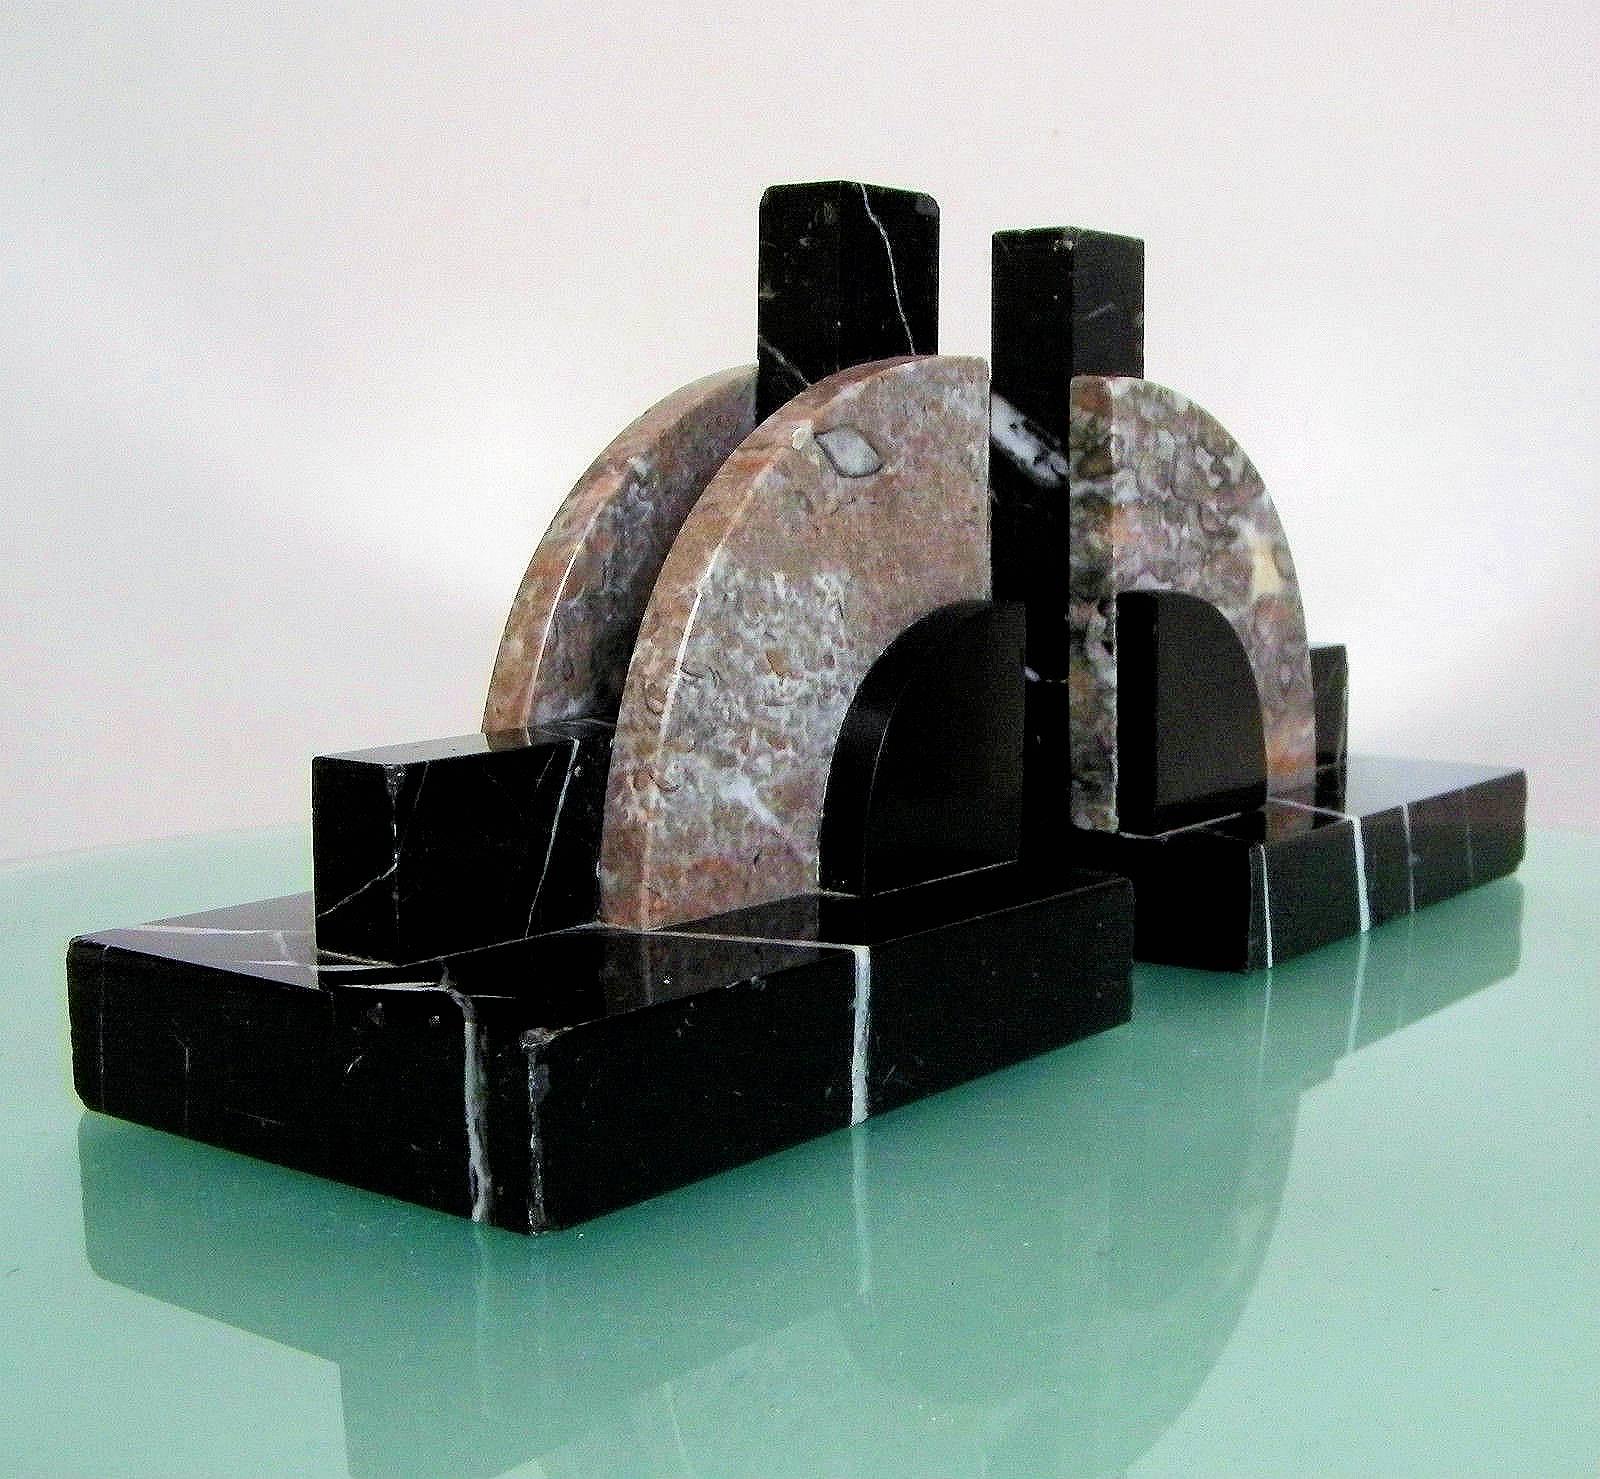 Very stylish 1930s Art Deco original solid marble bookends in a great geometric shape. Super size for modern use and heavy enough to support the weightiest of book collections. Ideal for desks or bookshelves or just as ornaments.  We sourced these